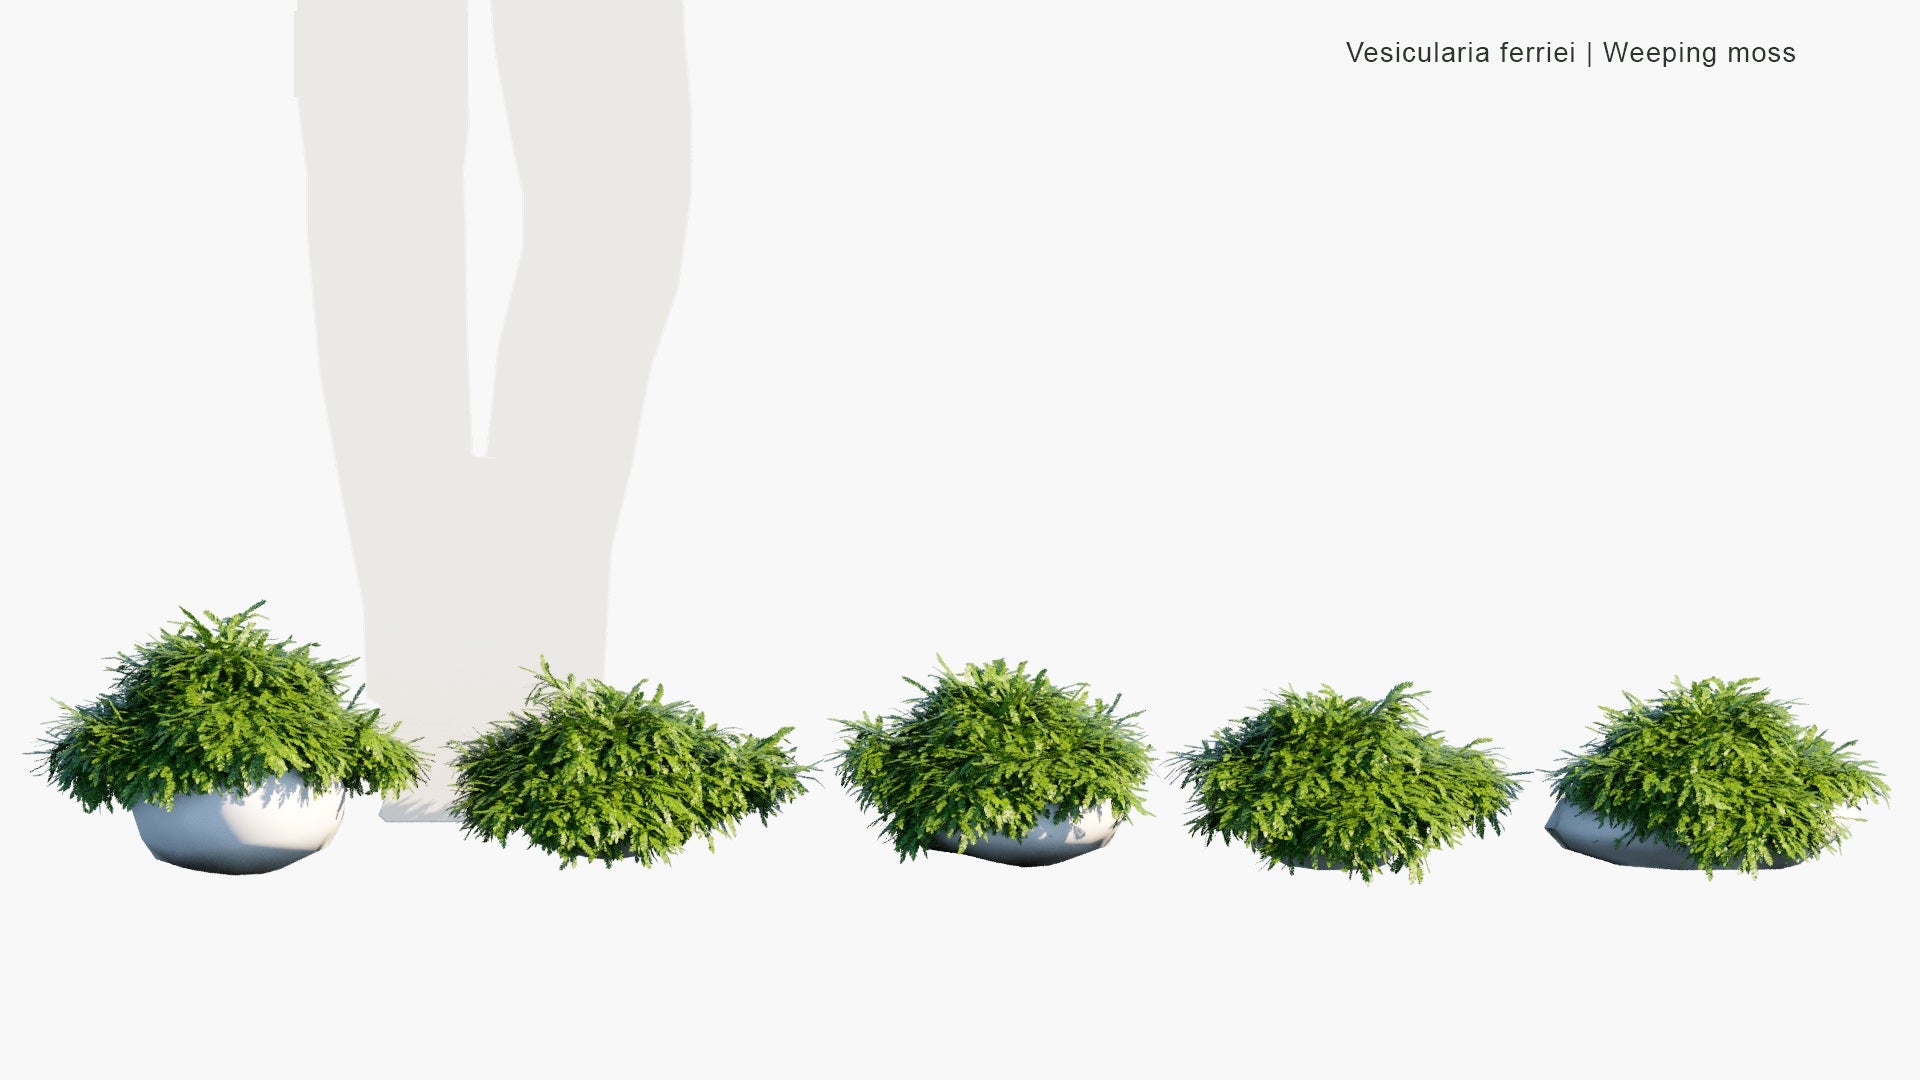 Low Poly Vesicularia Ferriei - Weeping Moss (3D Model)